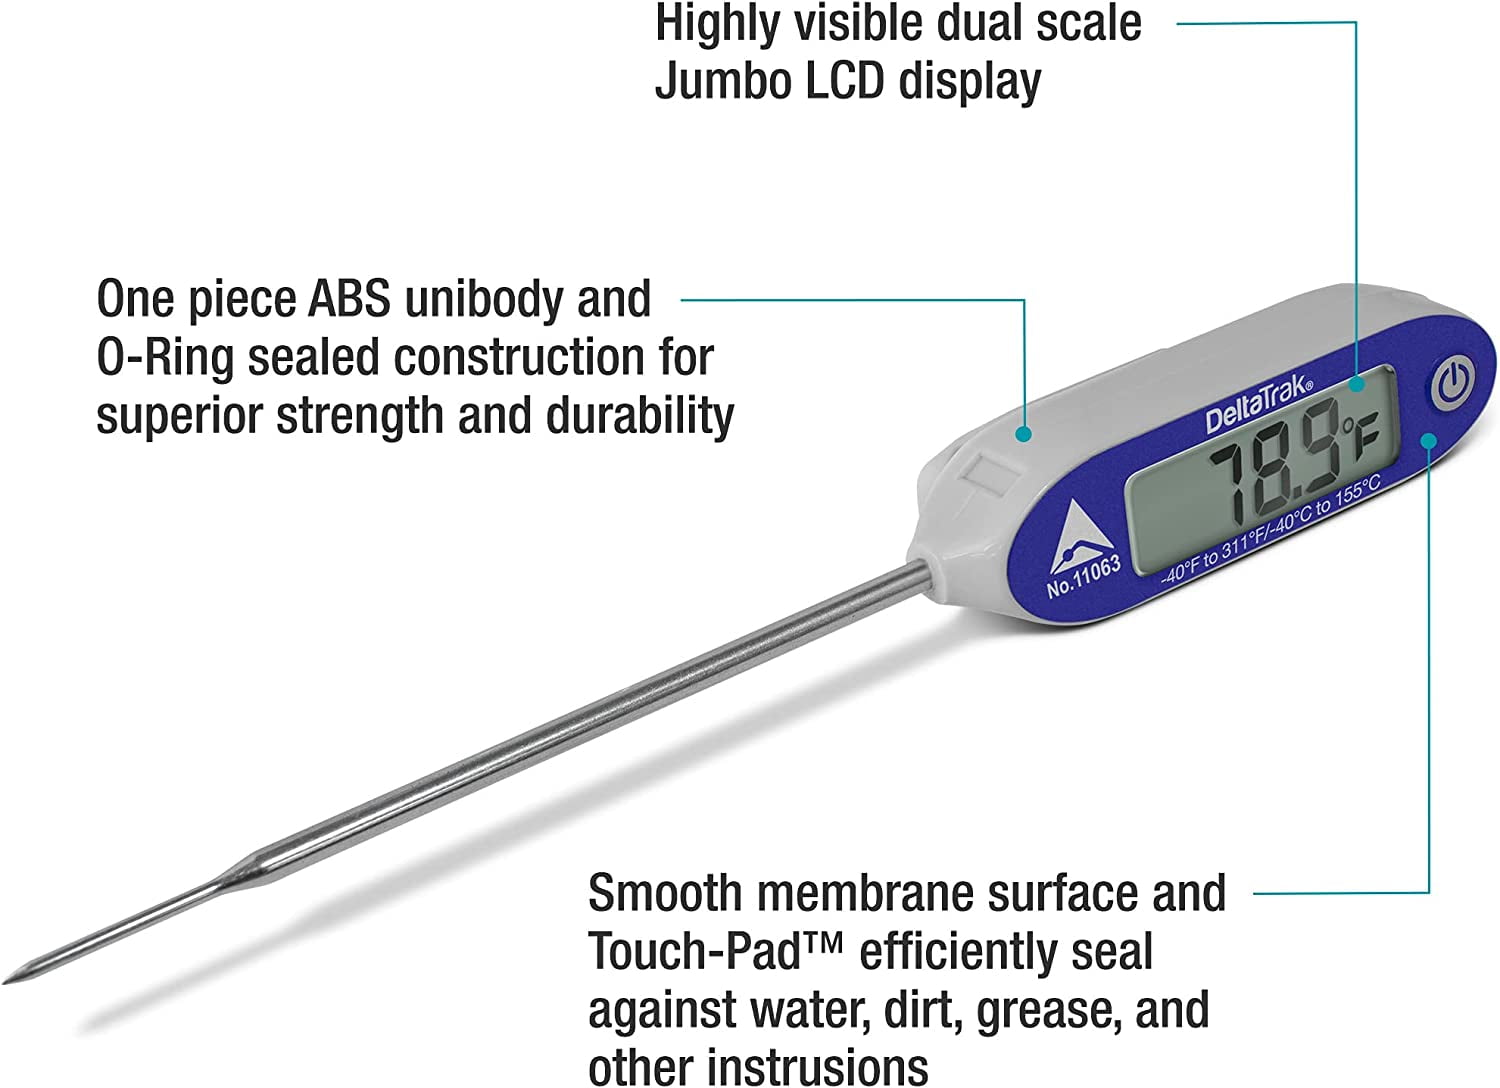 DeltaTrak FlashCheck® 11070 Jumbo Display Min Max Auto-Cal Reduced Tip  Probe Thermometer with Ten Alcohol Pads